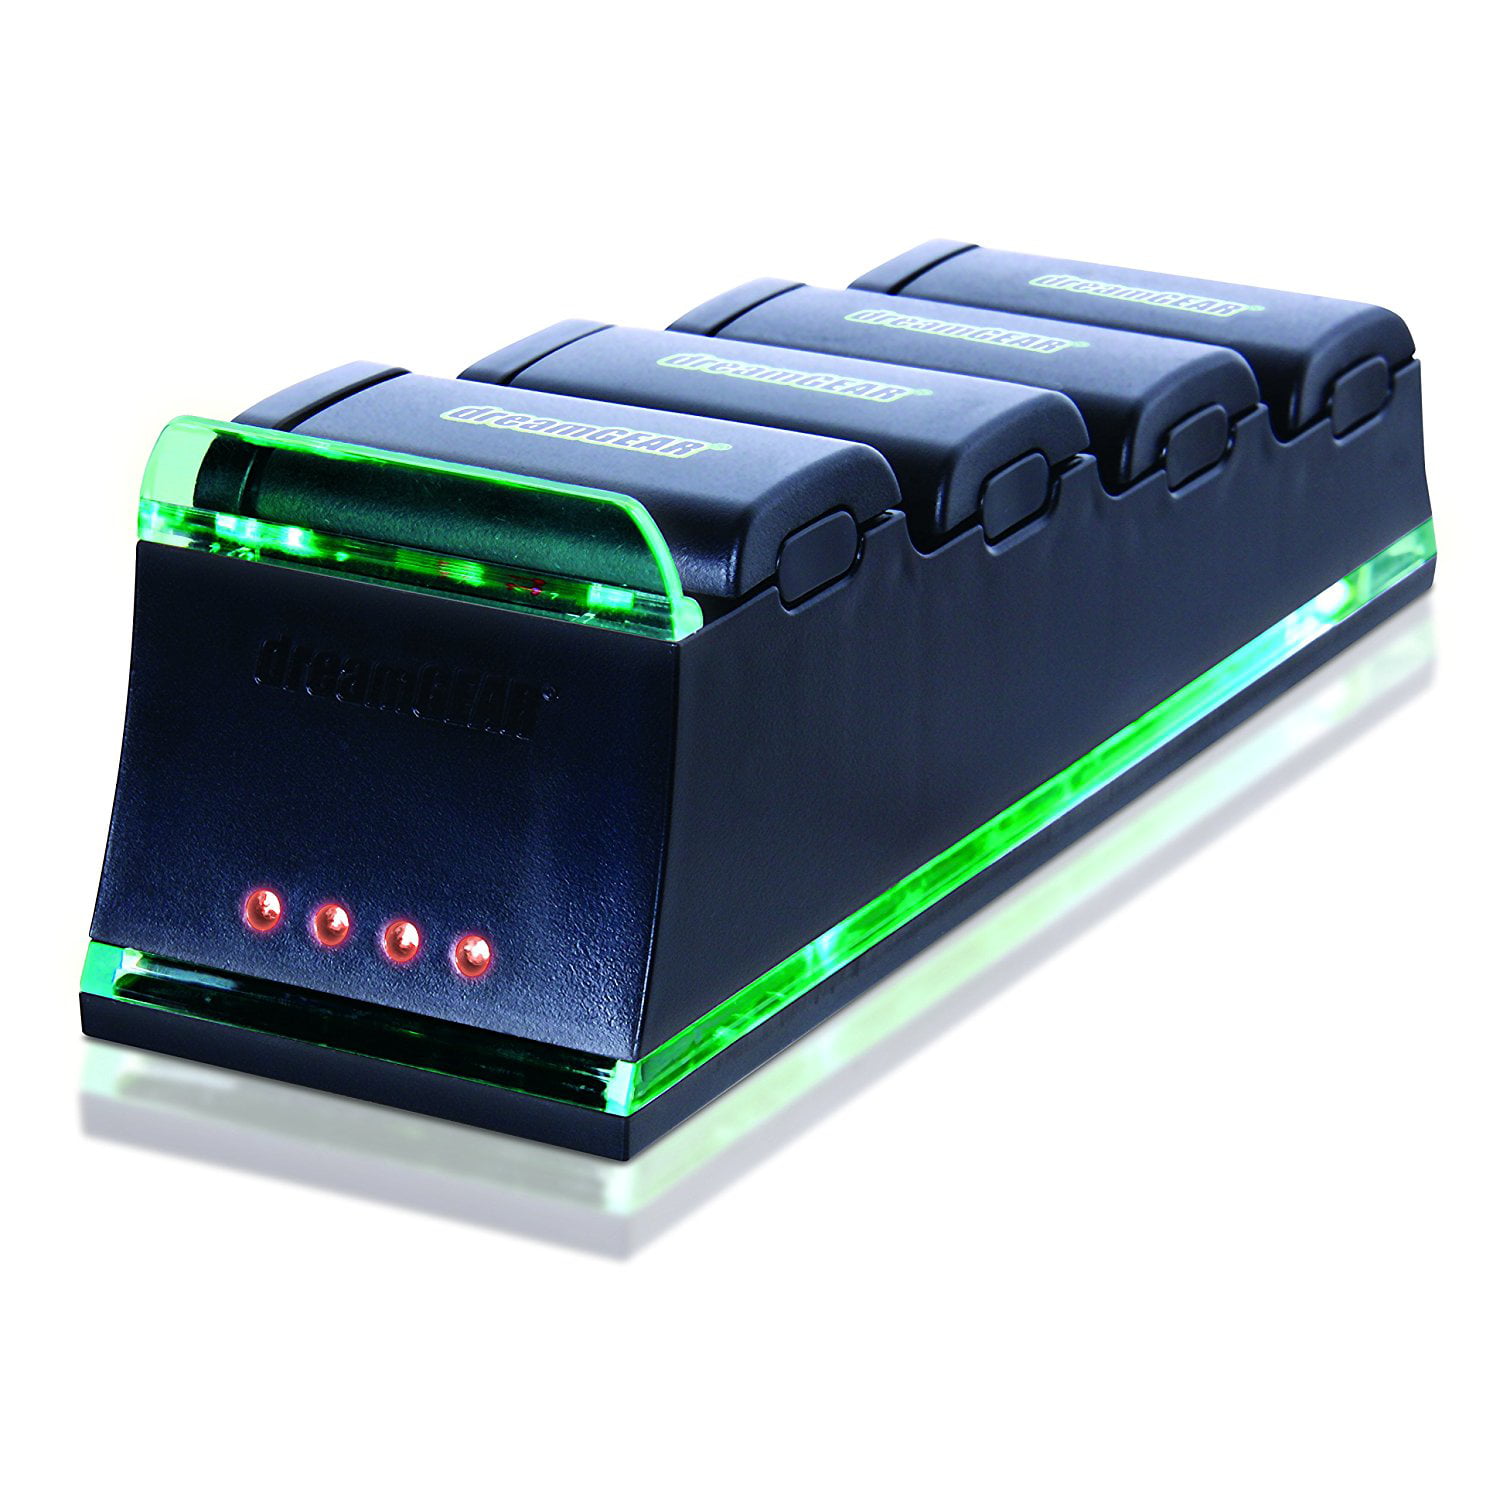 Dreamgear Xbox 360 Quad Dock Pro Charge Up To Four Xbox 360